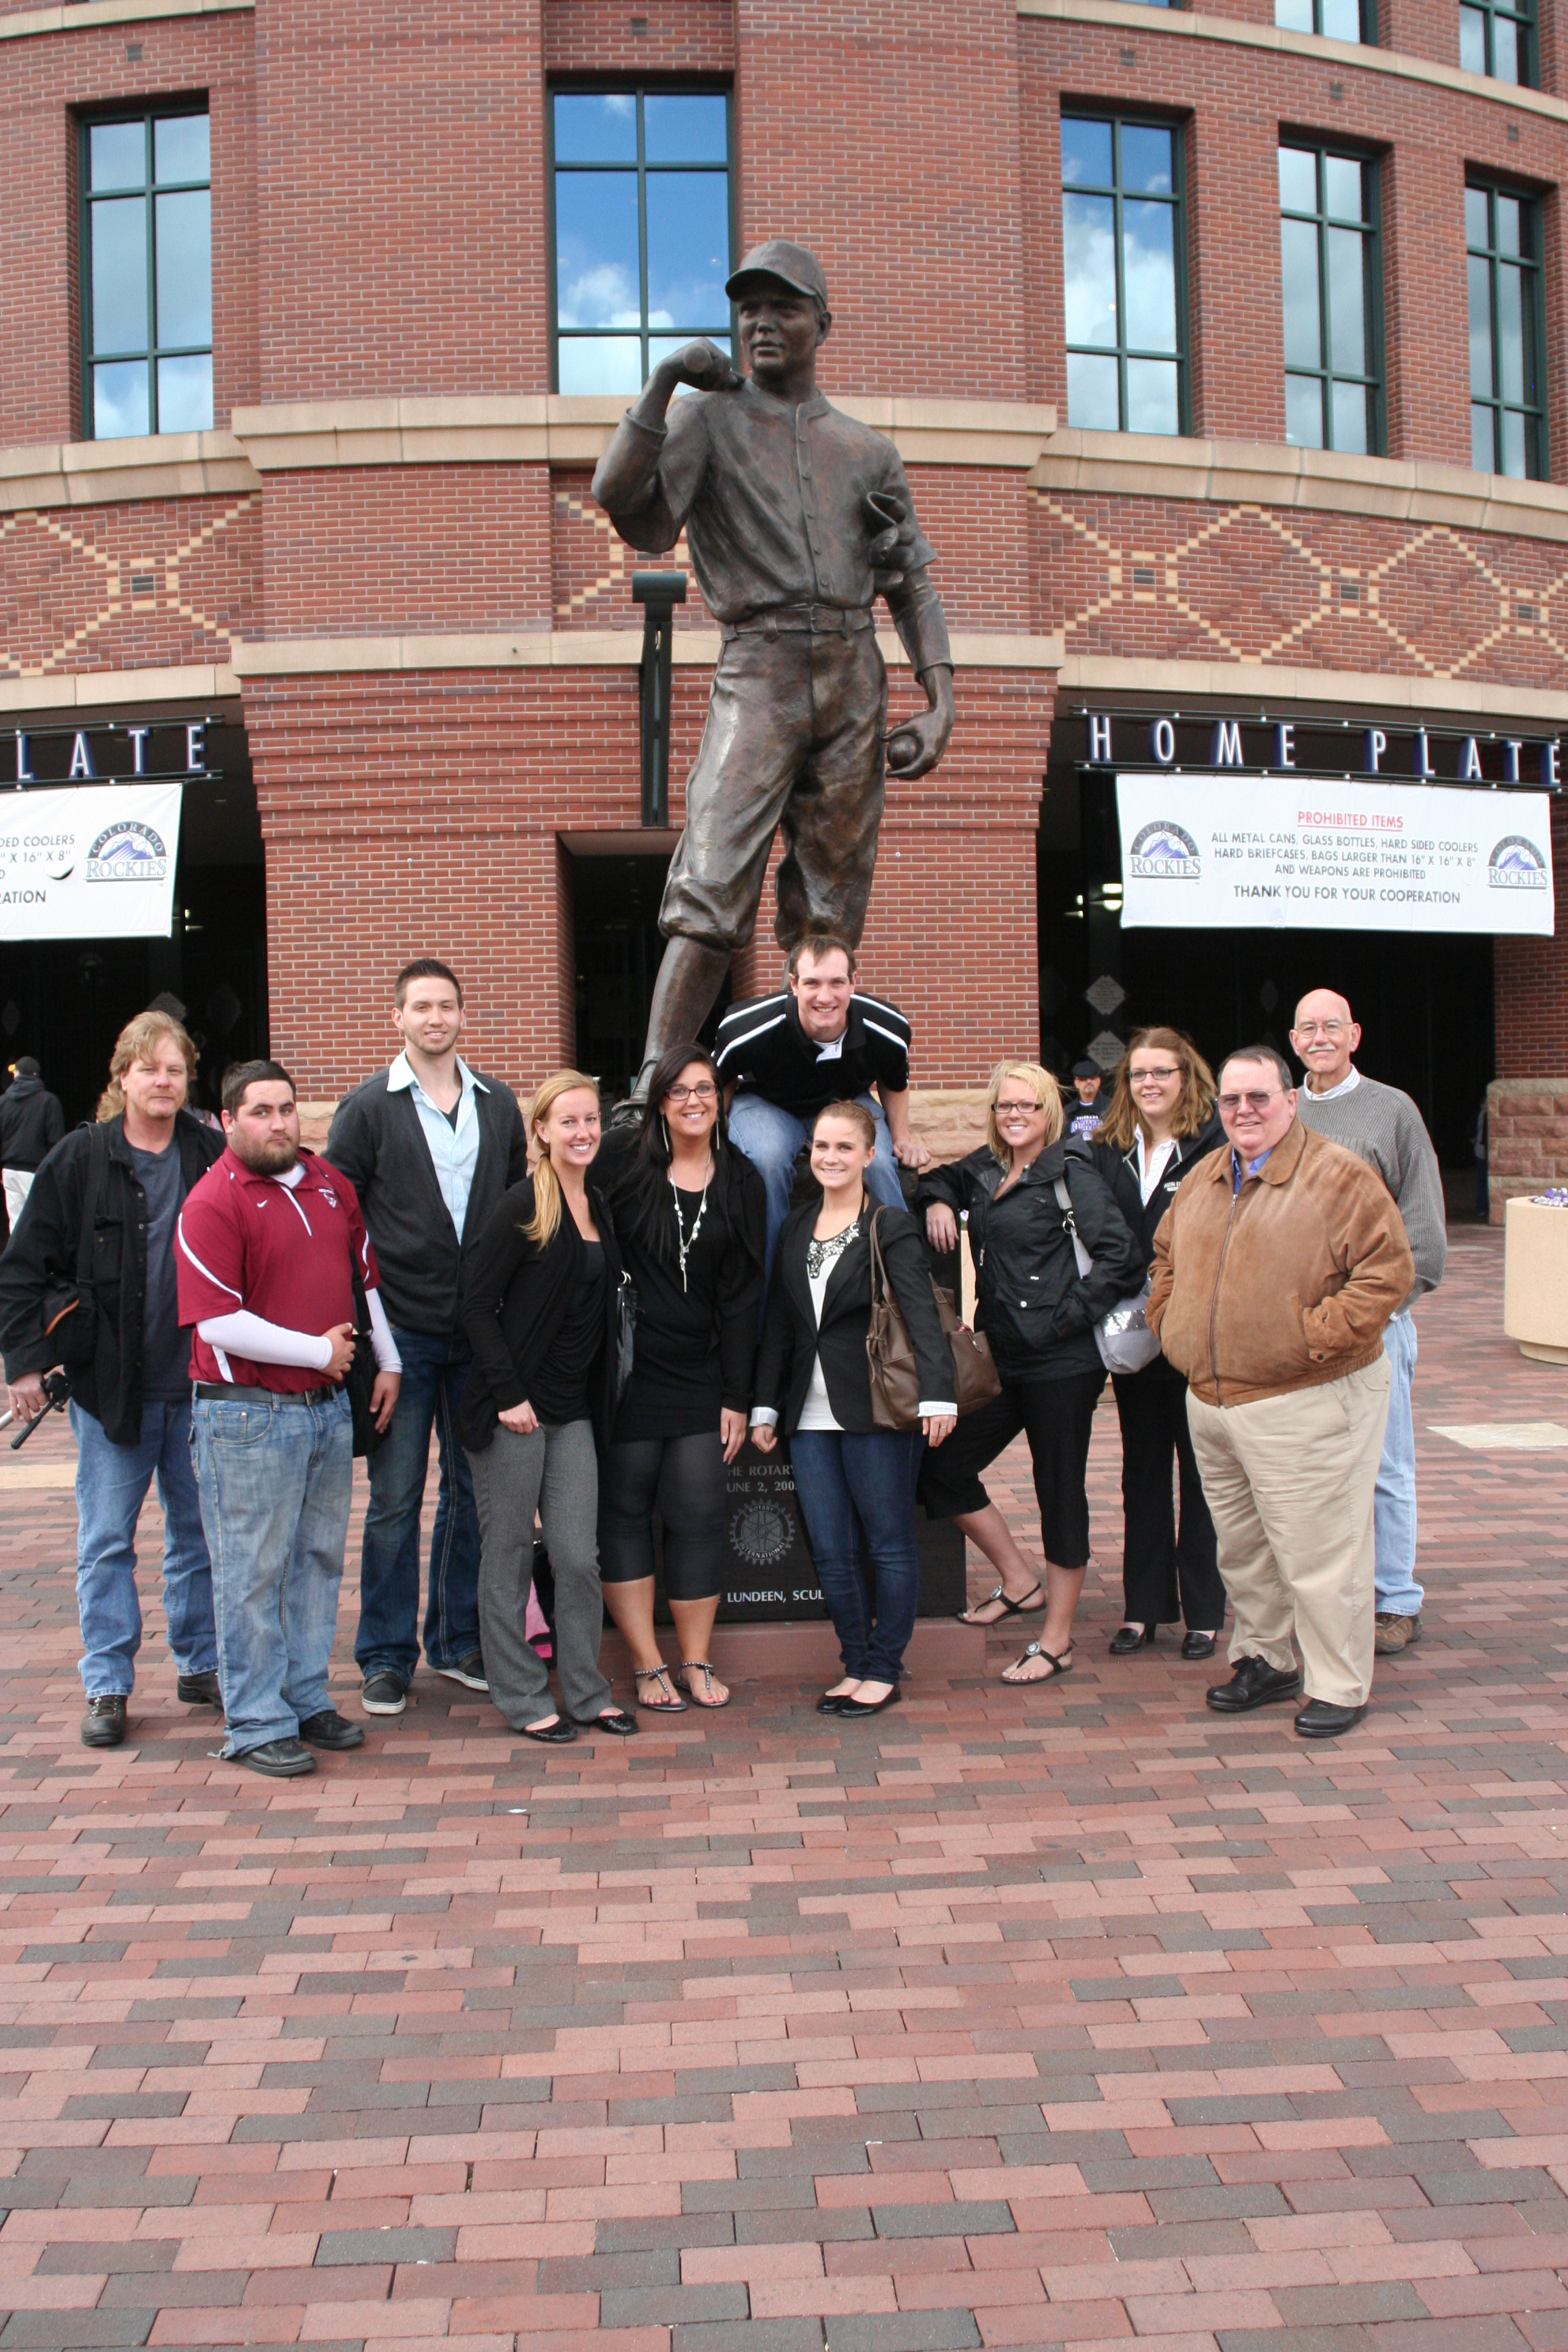 The Sports Reporting Class of Mesa State College traveled to Denver to report on the Rockies vs Diamond Back game.